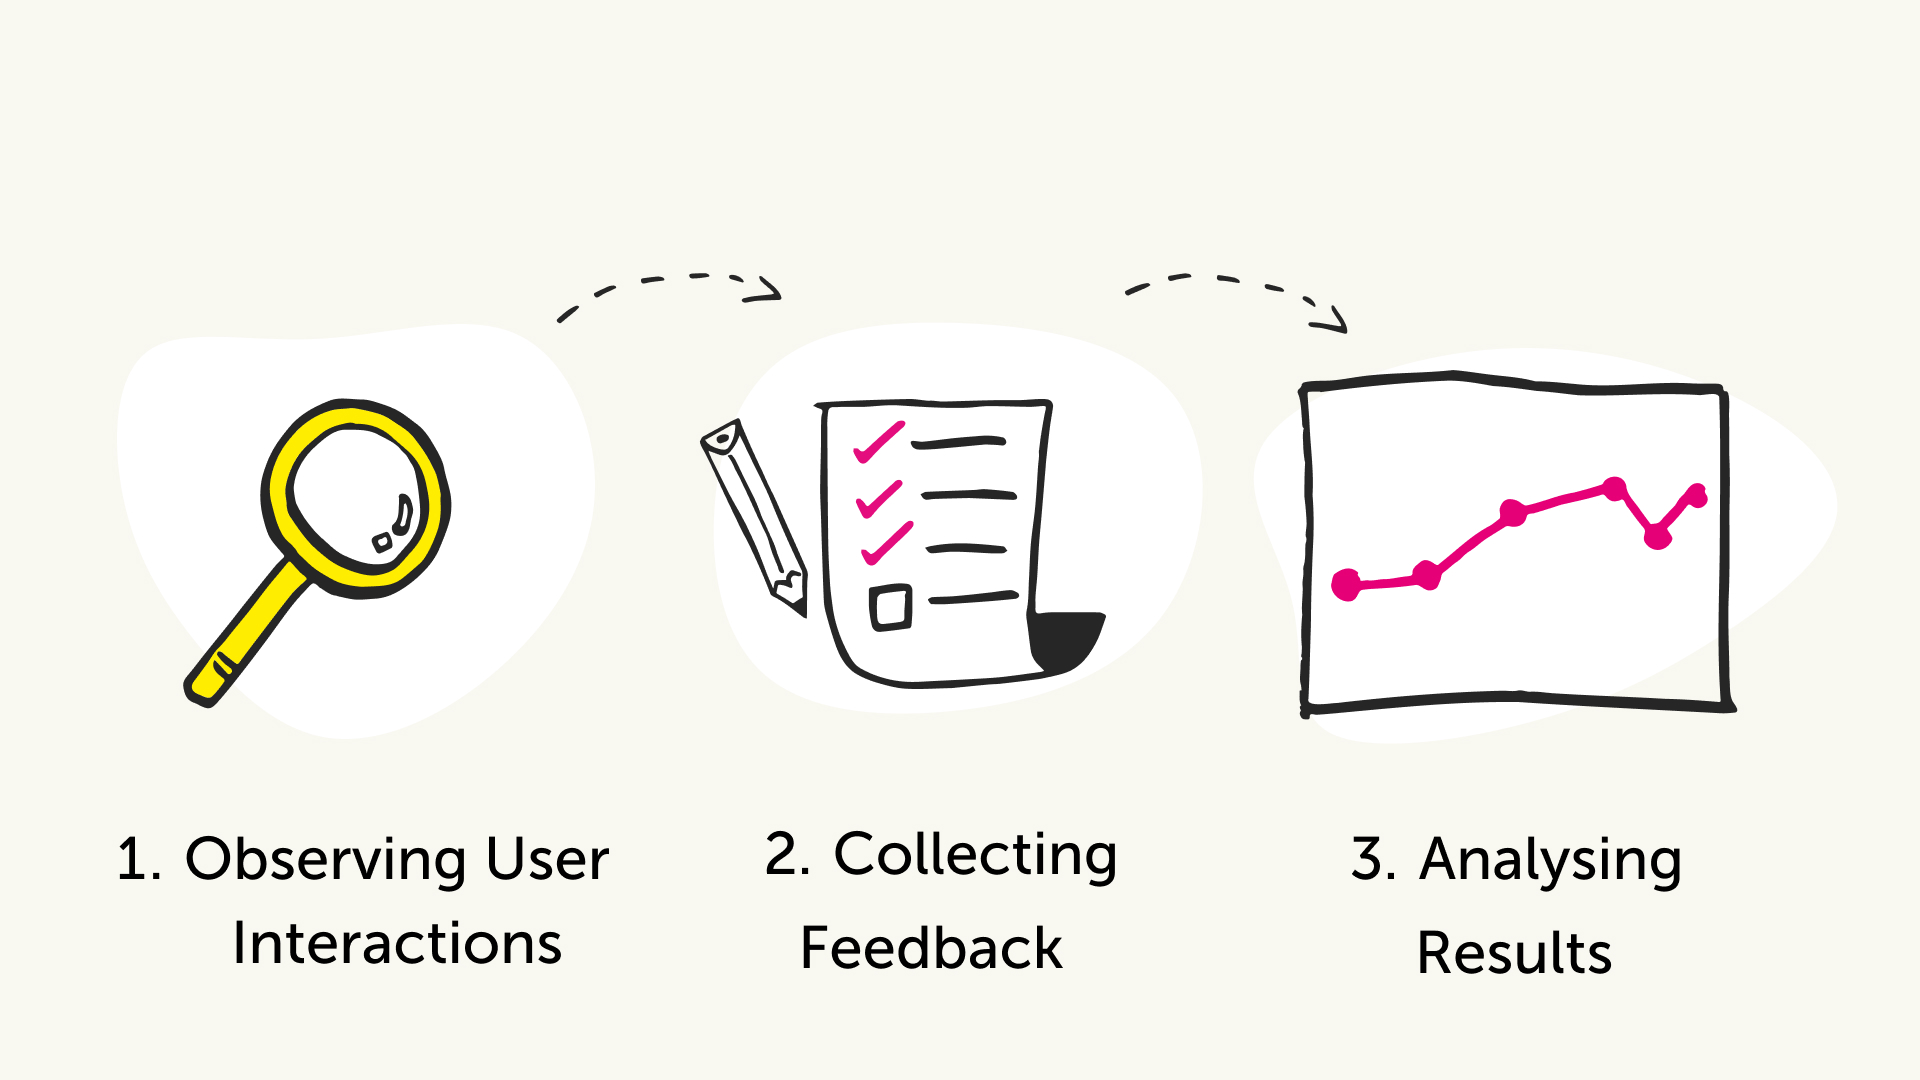 The image features a three-step process illustration in a minimalistic style. "Observing User Interactions" is depicted with a magnifying glass, symbolizing the close examination of user behavior. "Collecting Feedback" shows a clipboard with a checklist and a pencil, representing the gathering of user opinions and experiences. "Analysing Results" is illustrated with a line graph on a piece of paper, indicating the examination and interpretation of the collected data.